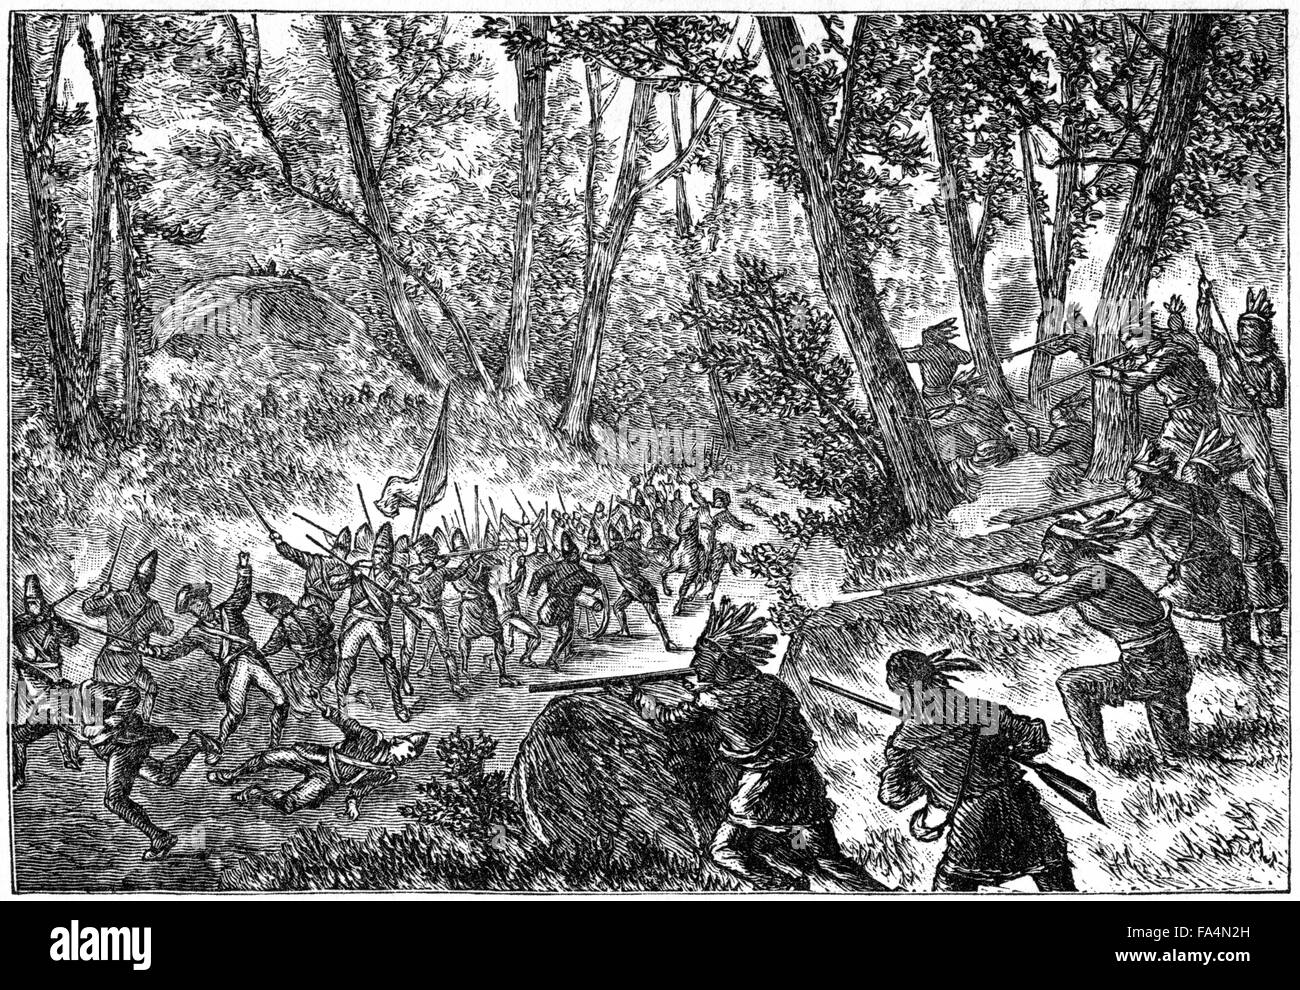 General Edward Braddock (1695-1755), “Braddock’s Defeat”,  French and Indian War, 1755, Book Illustration from “Indian Horrors or Massacres of the Red Men”, by Henry Davenport Northrop, 1891 Stock Photo